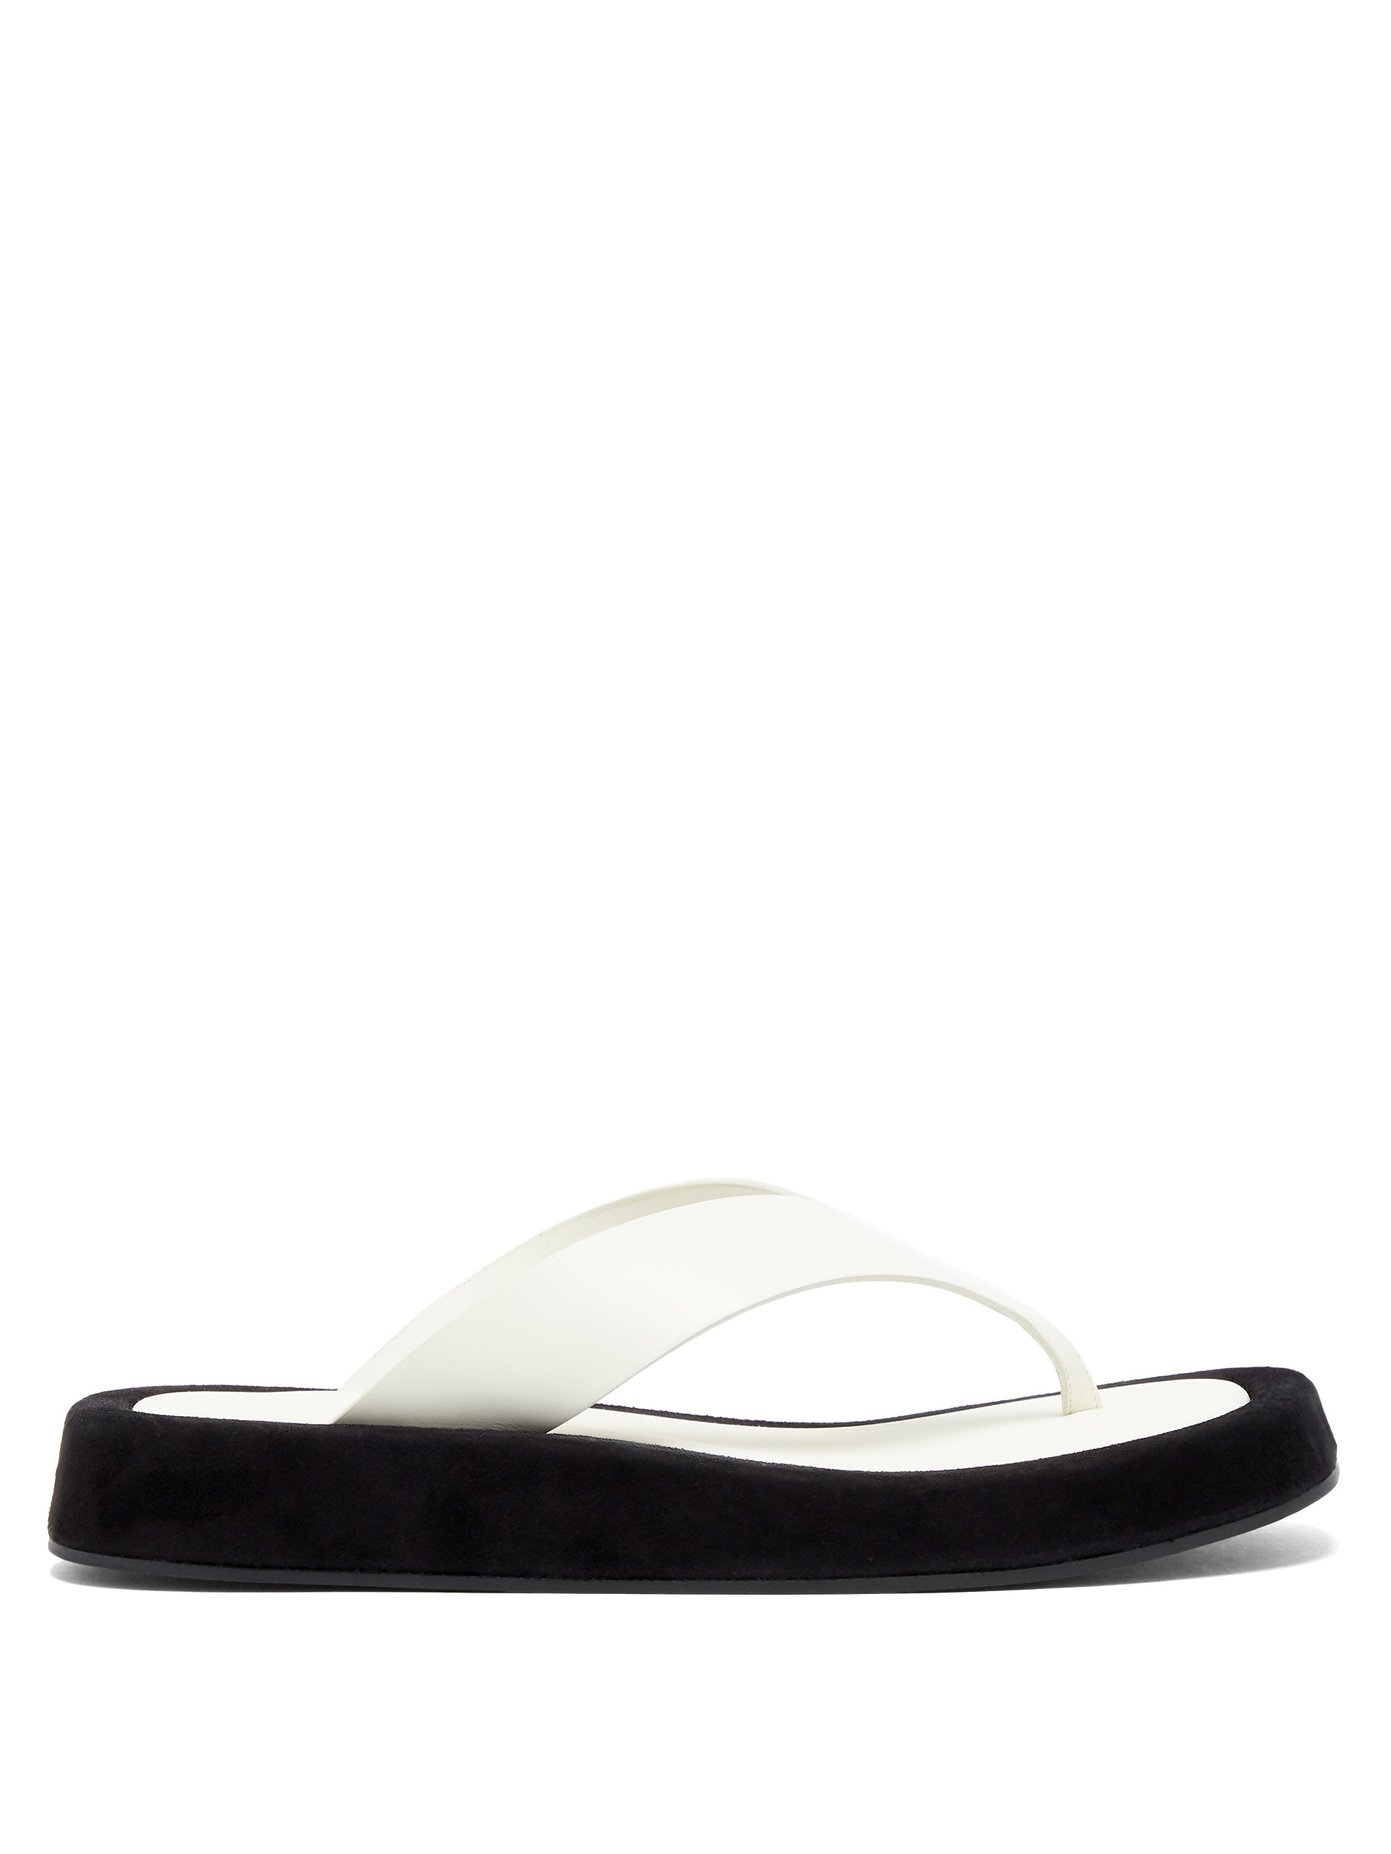 Ginza leather sandals | The Row 